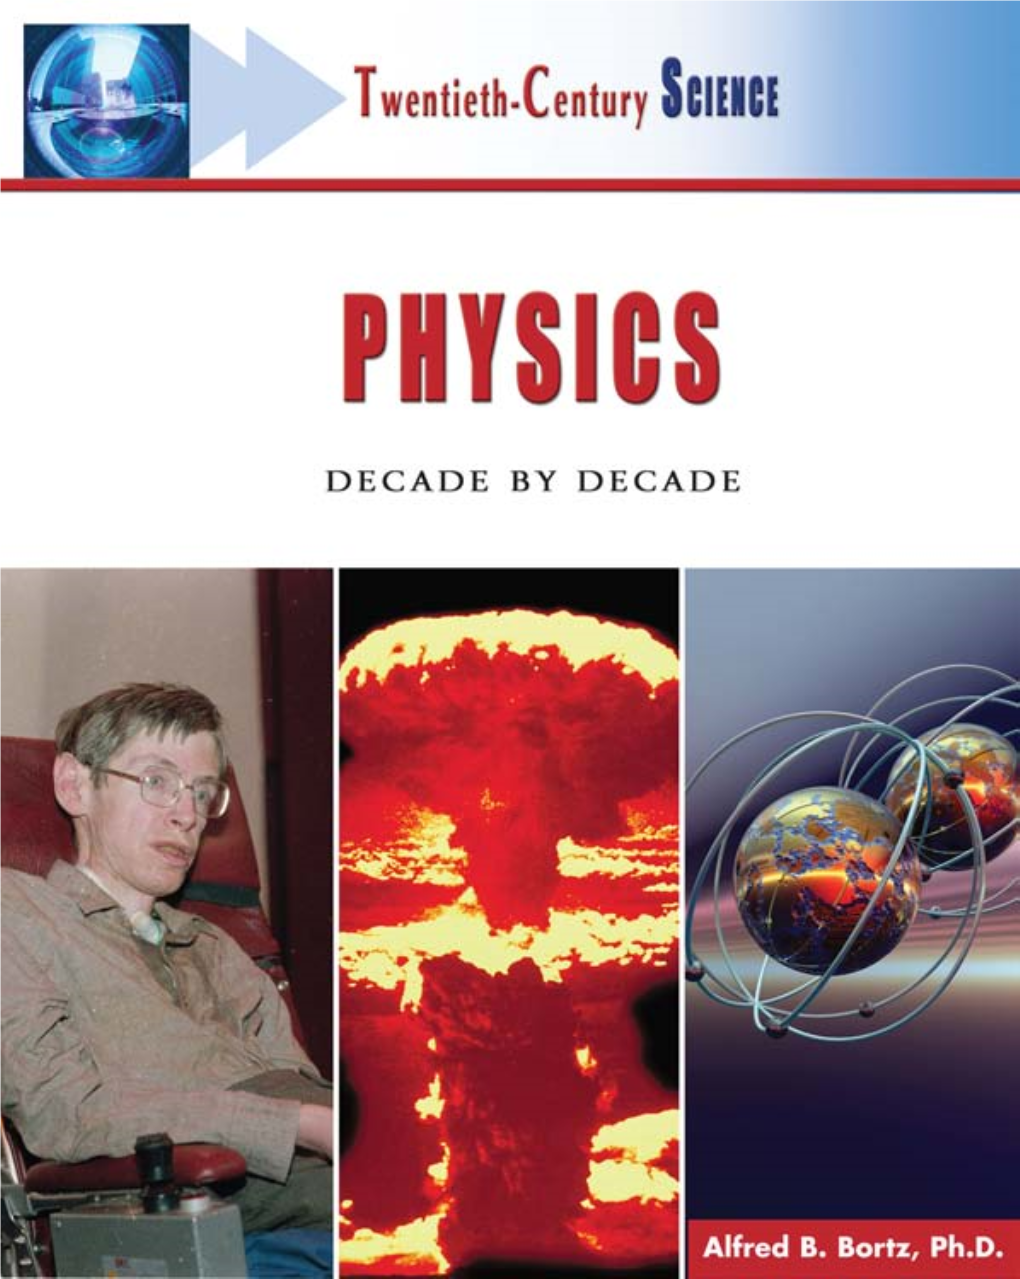 Physics in a Time of War